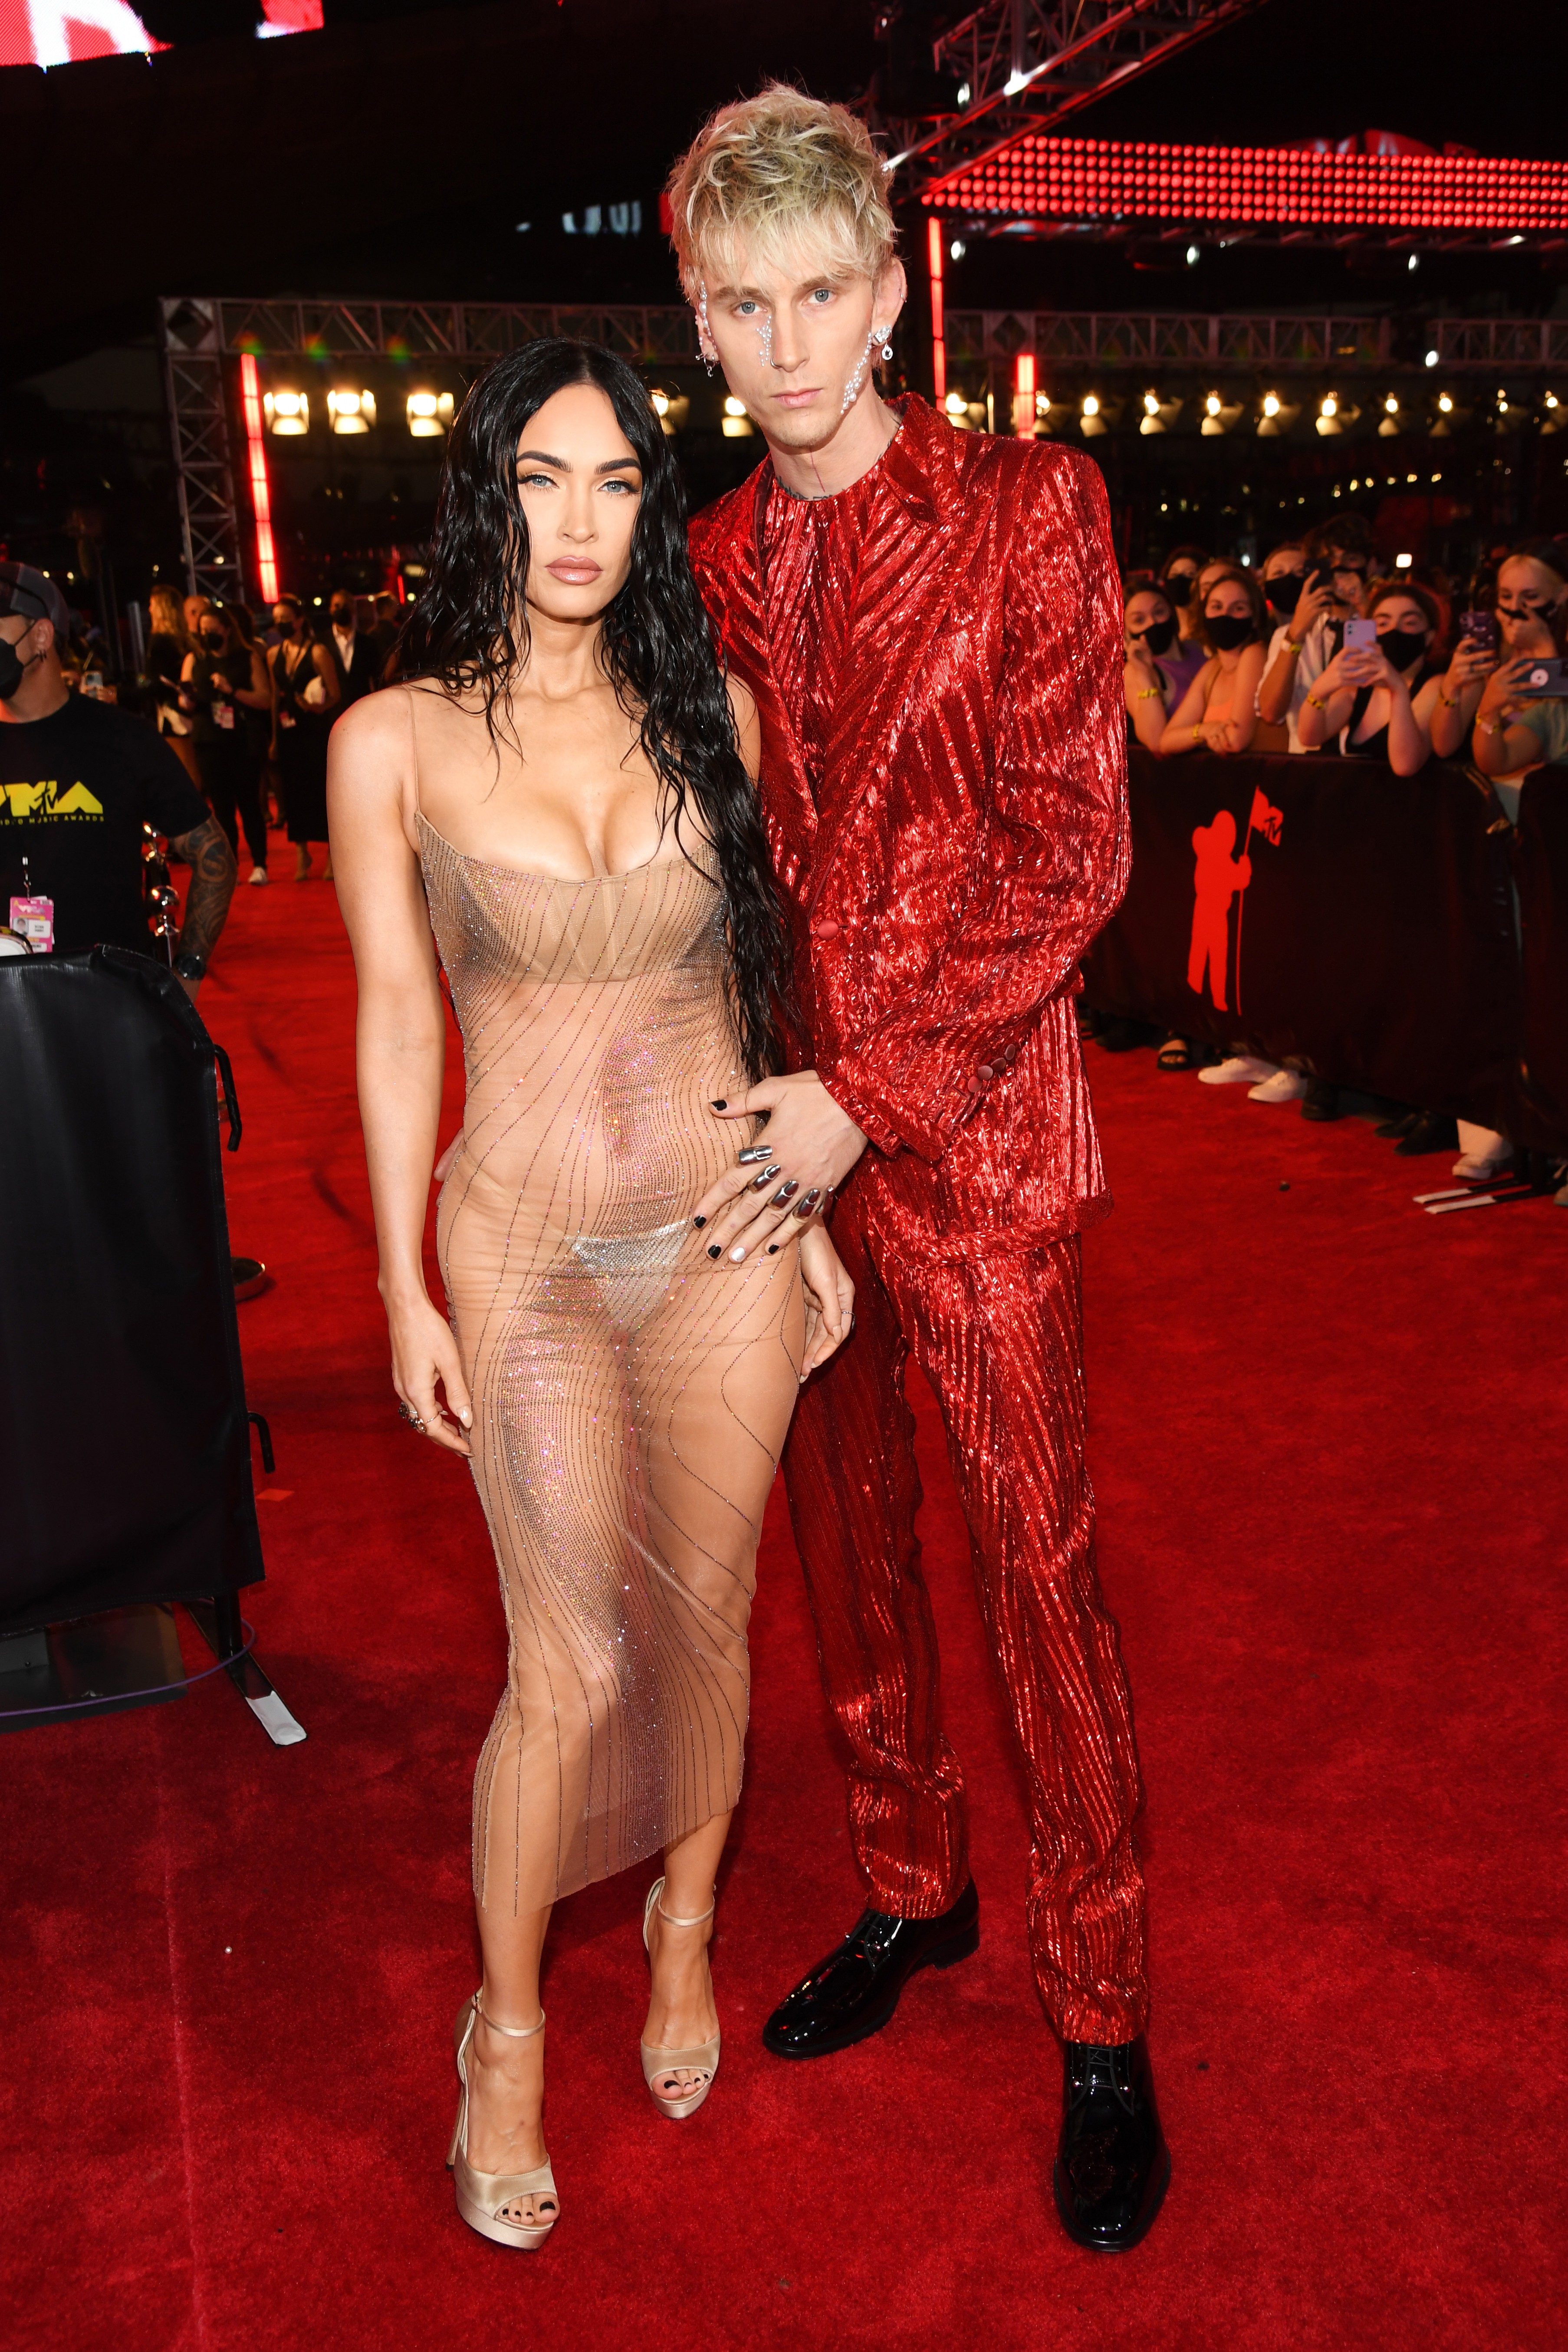 Megan Fox and Machine Gun Kelly at the MTV Video Music Awards in New York City on September 12, 2021 | Source: Getty Images